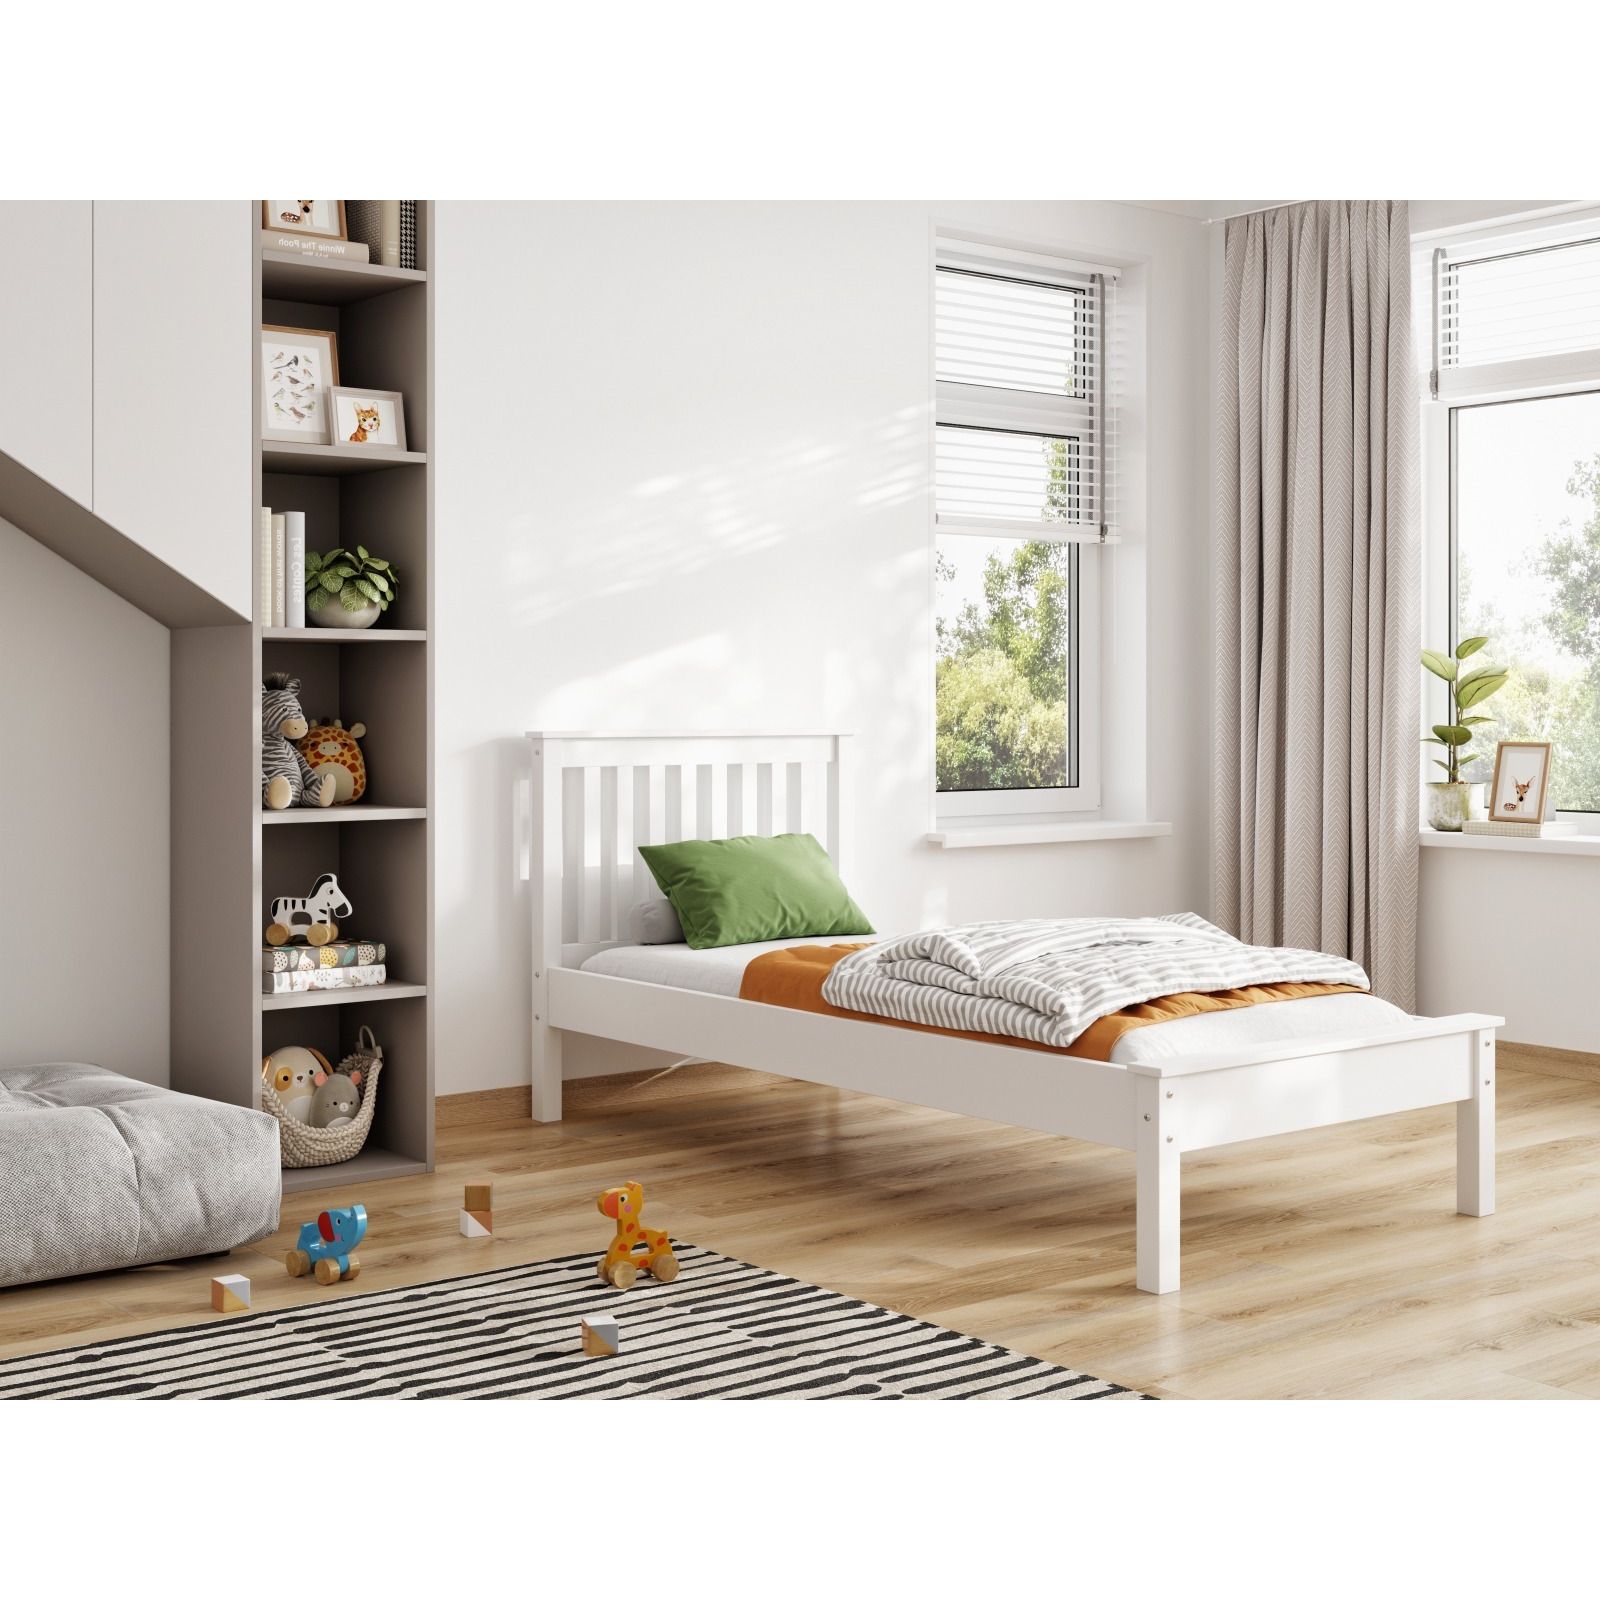 Flair Disley Solid Wood Single Bed Frame - White - image 1